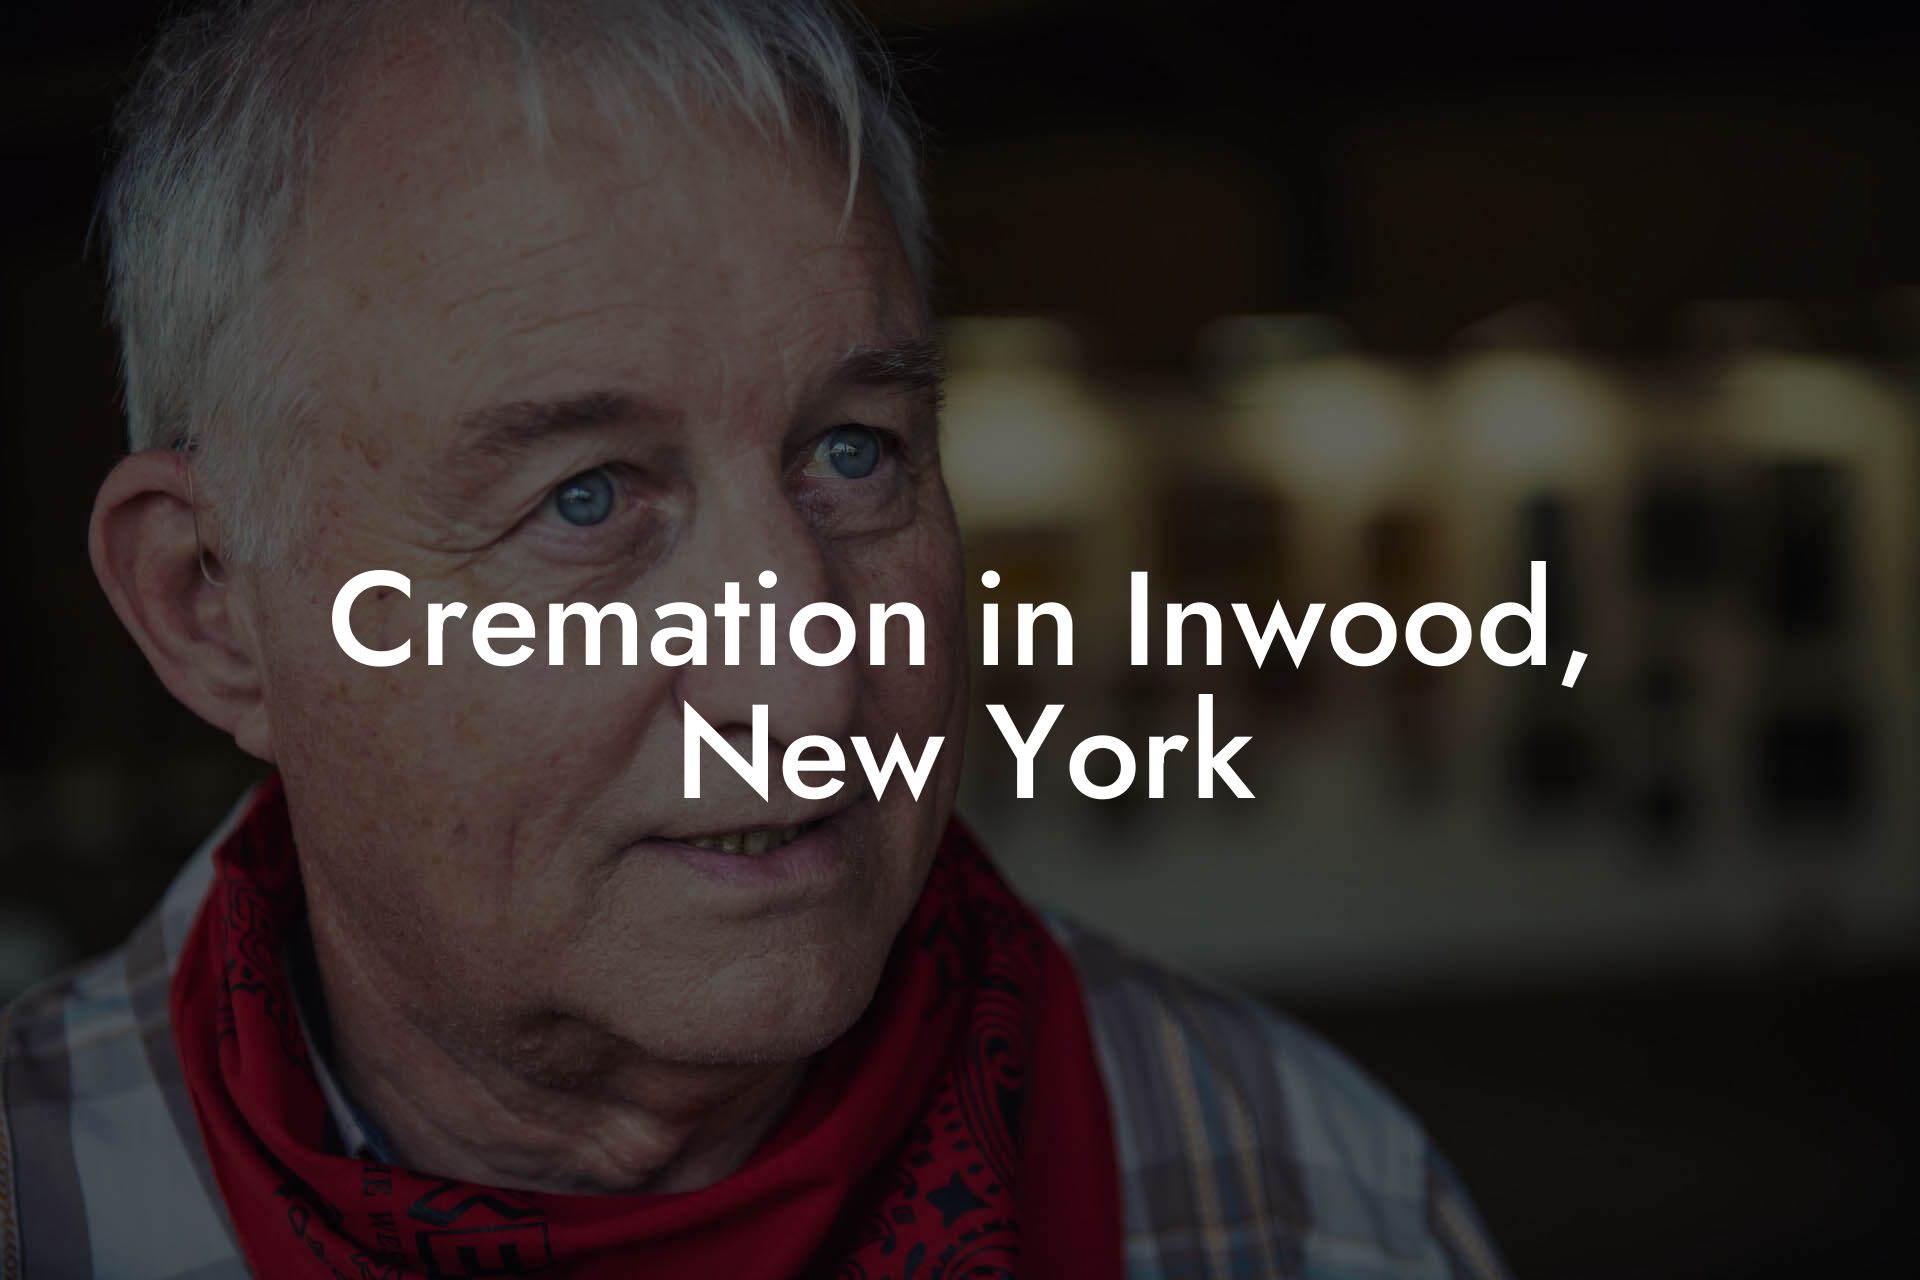 Cremation in Inwood, New York